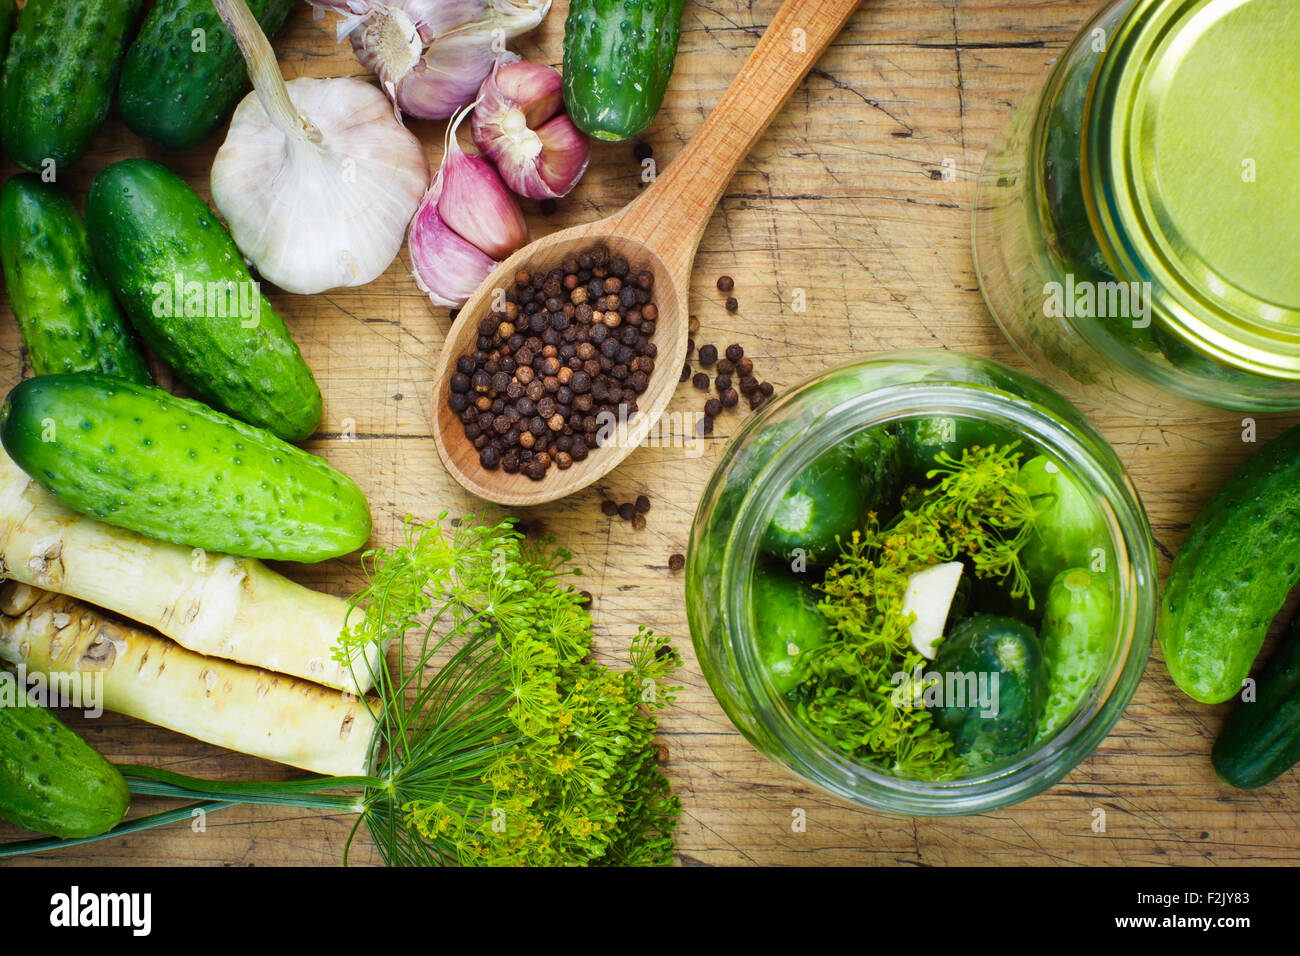 Preparations to make homemade pickles with garlic, dill and horseradish on woodboard Stock Photo